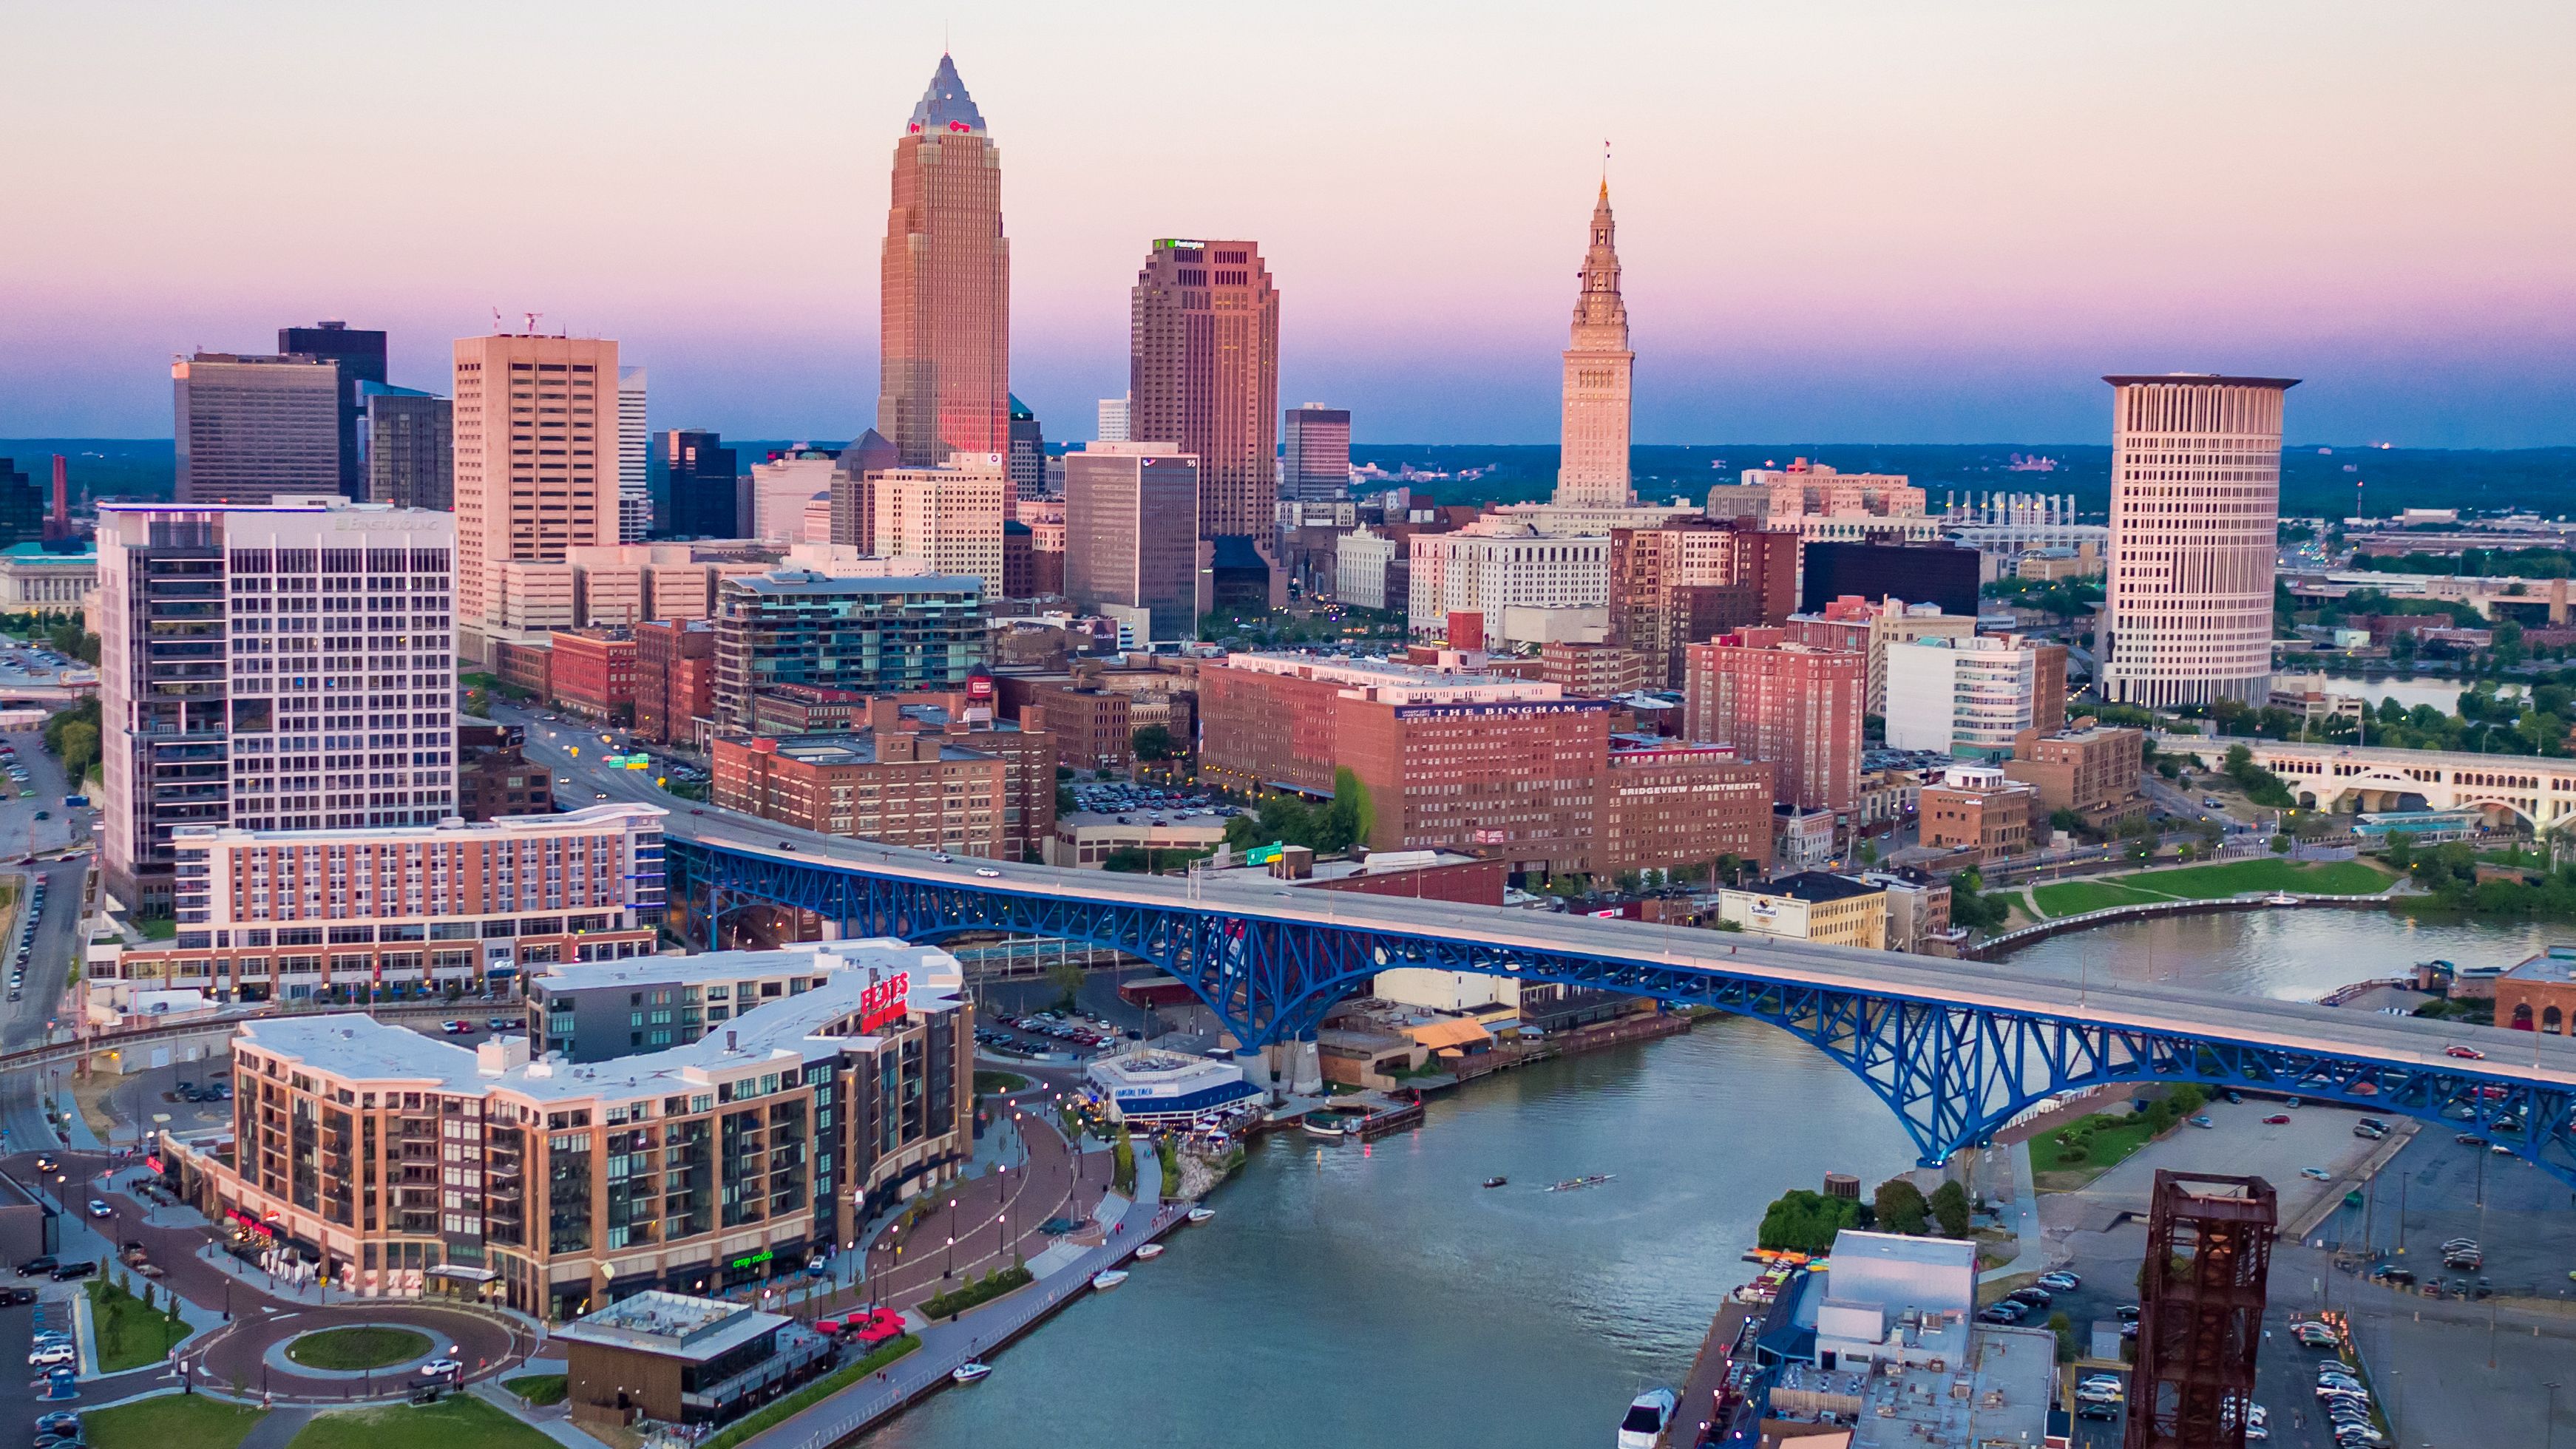 What to Experience in Cleveland, Ohio This Spring